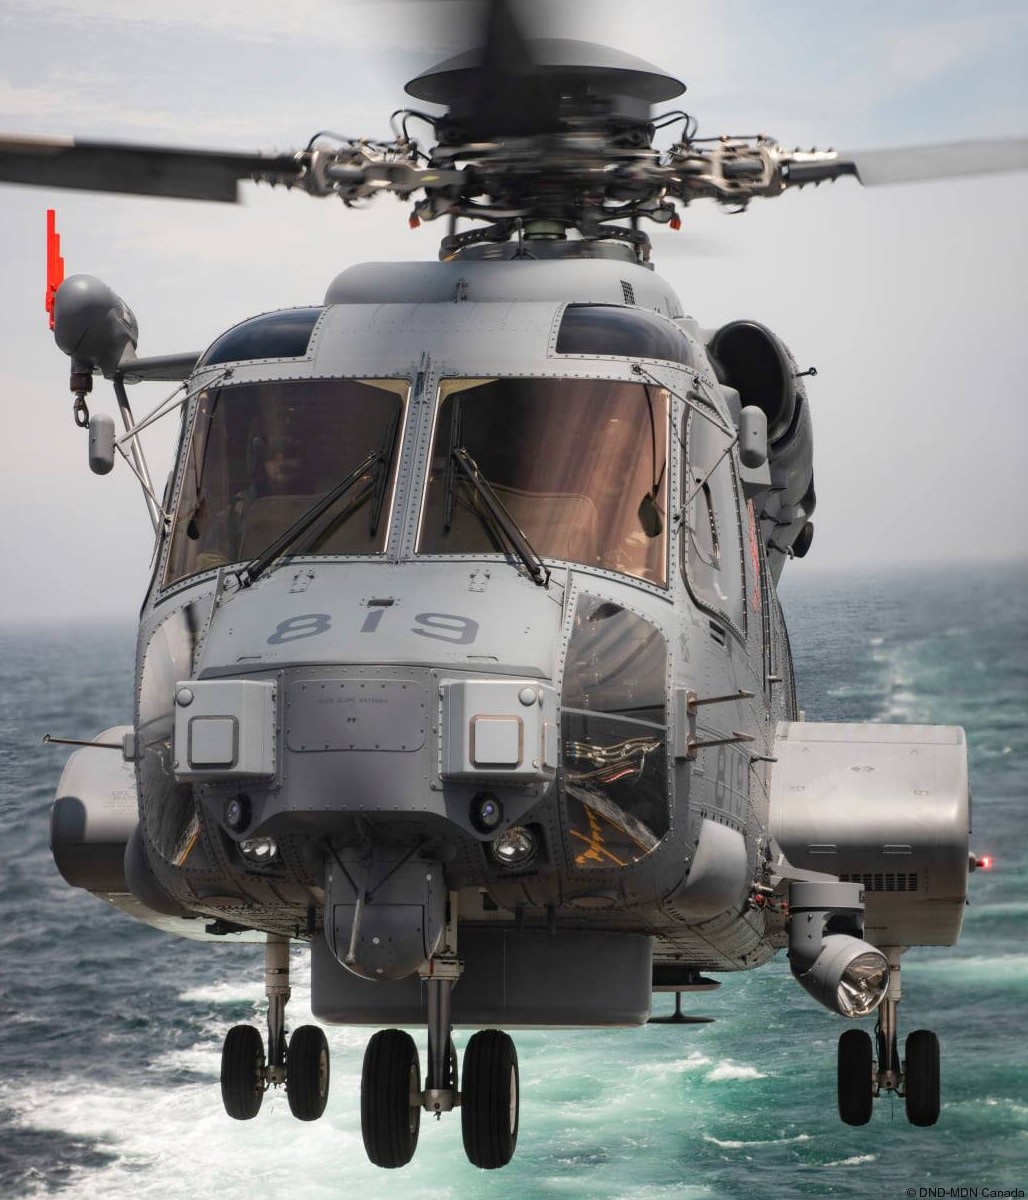 ch-148 cyclone naval helicopter royal canadian air force navy rcaf sikorsky hmcs 406 423 443 maritime squadron 45